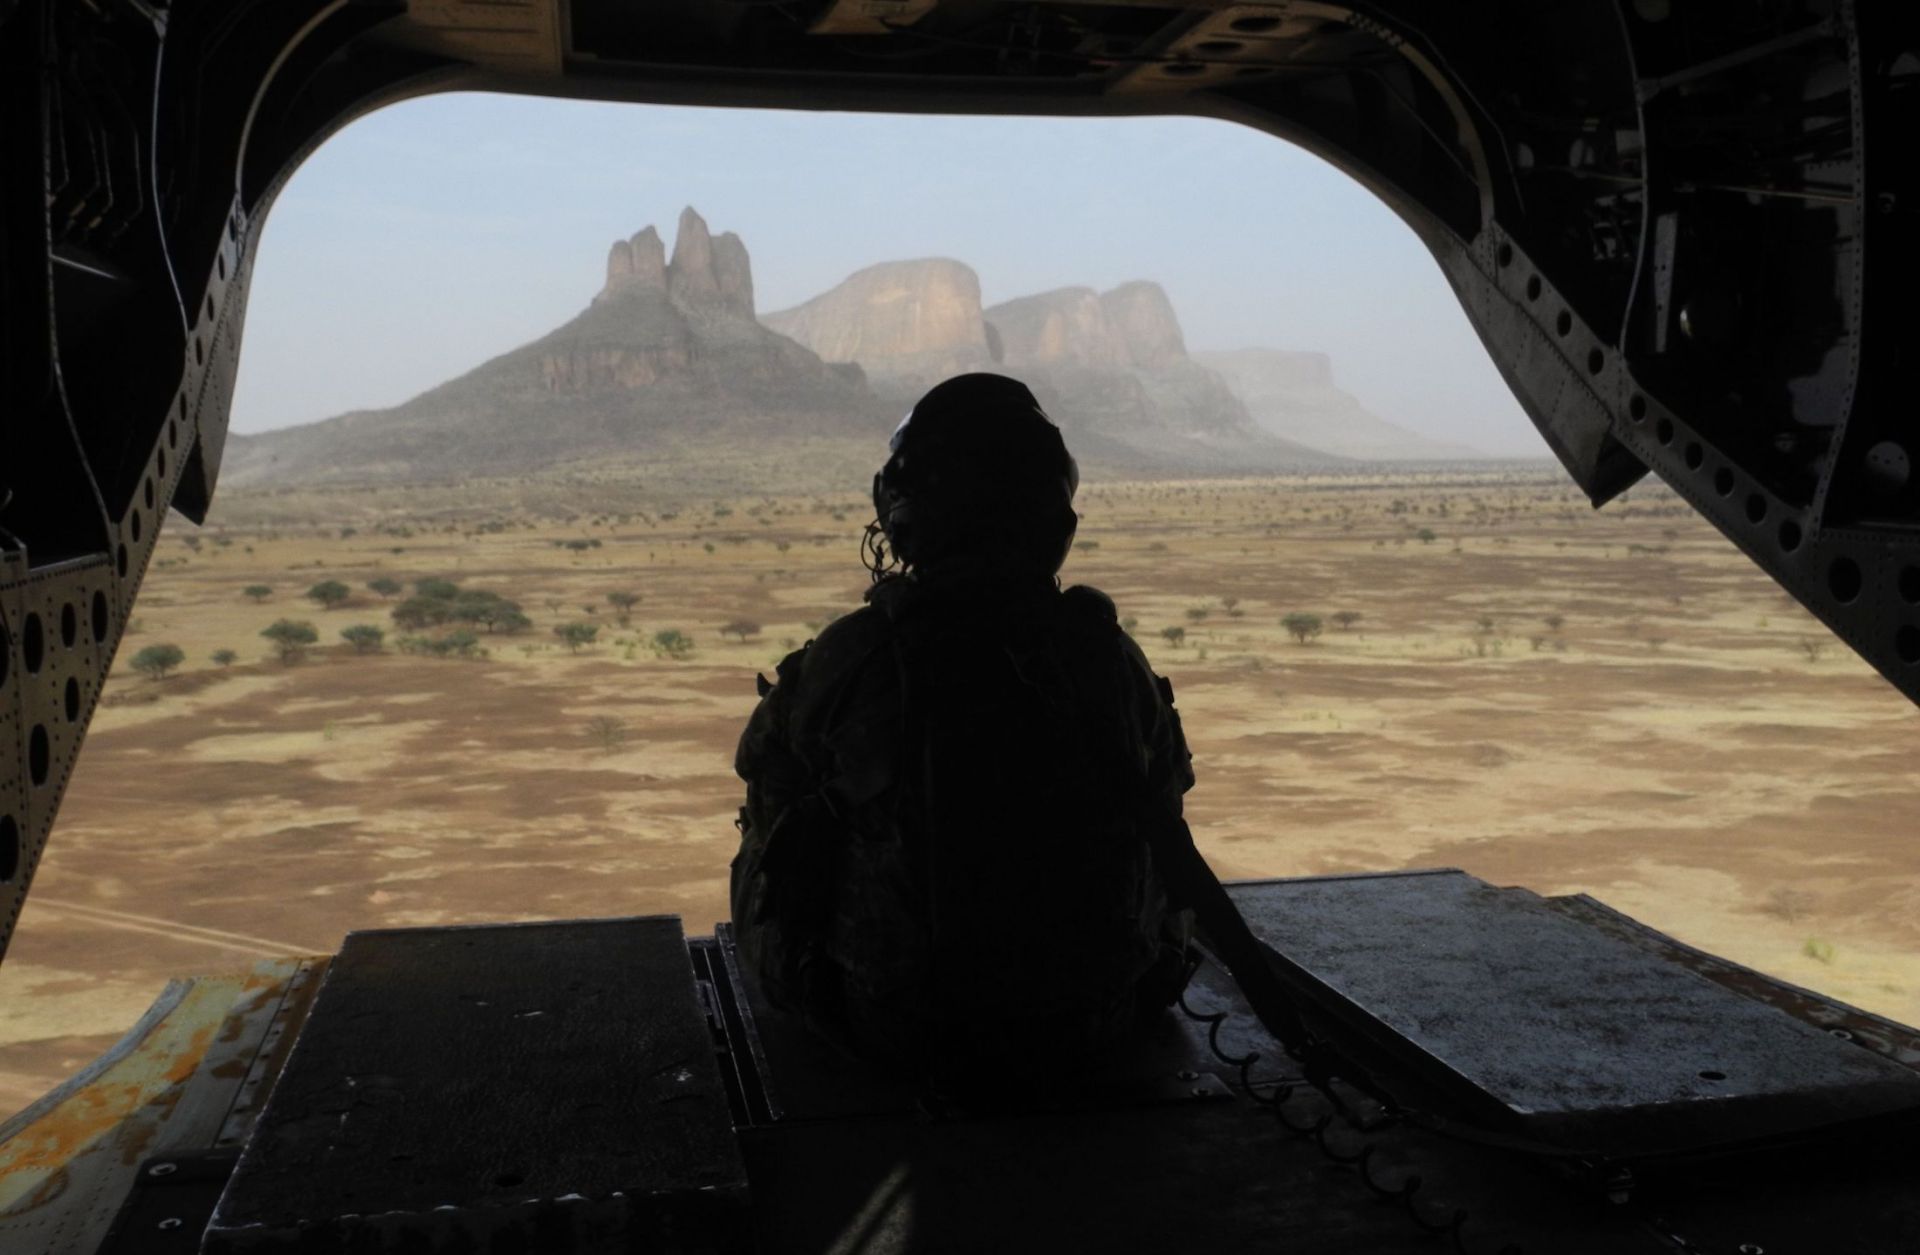 A British soldier leaves the Hombori area aboard a Chinook helicopter on March 28, 2019 during the start of the French Barkhane Force operation in Mali's Gourma region.